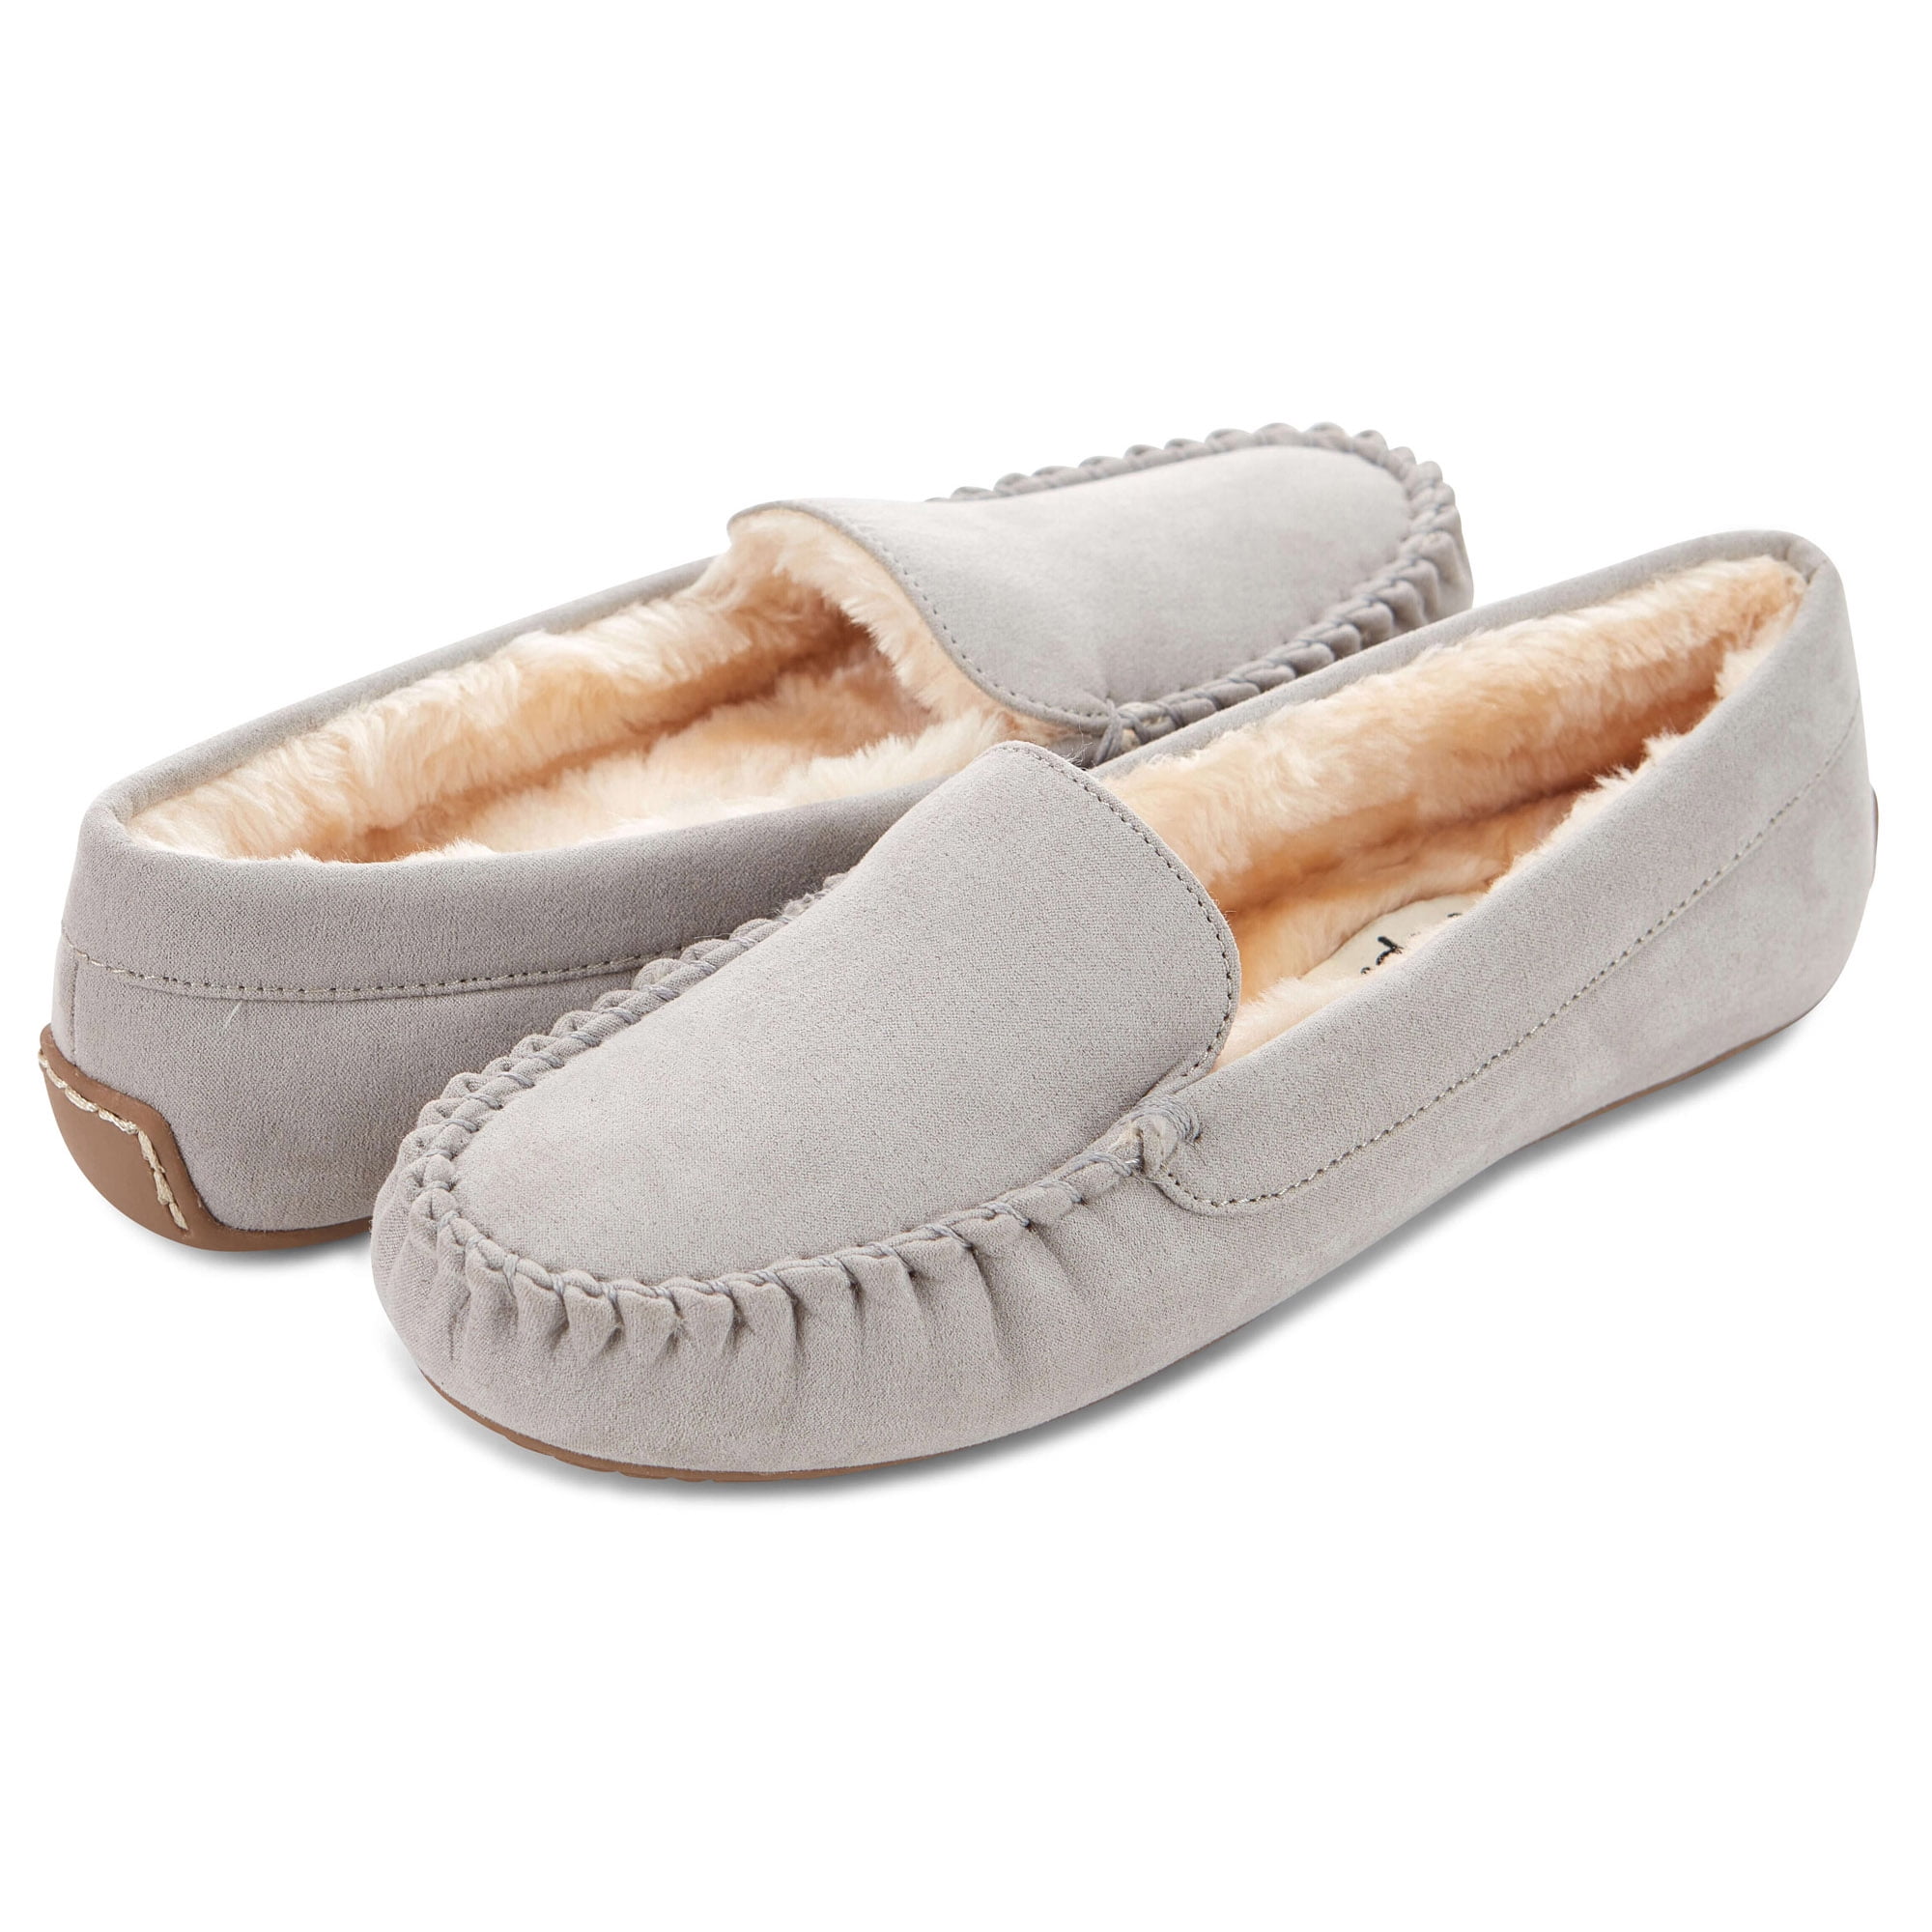 Floopi Womens Indoor/Outdoor Faux Fur Lined Basic Moccasins Slipper W/Memory Foam